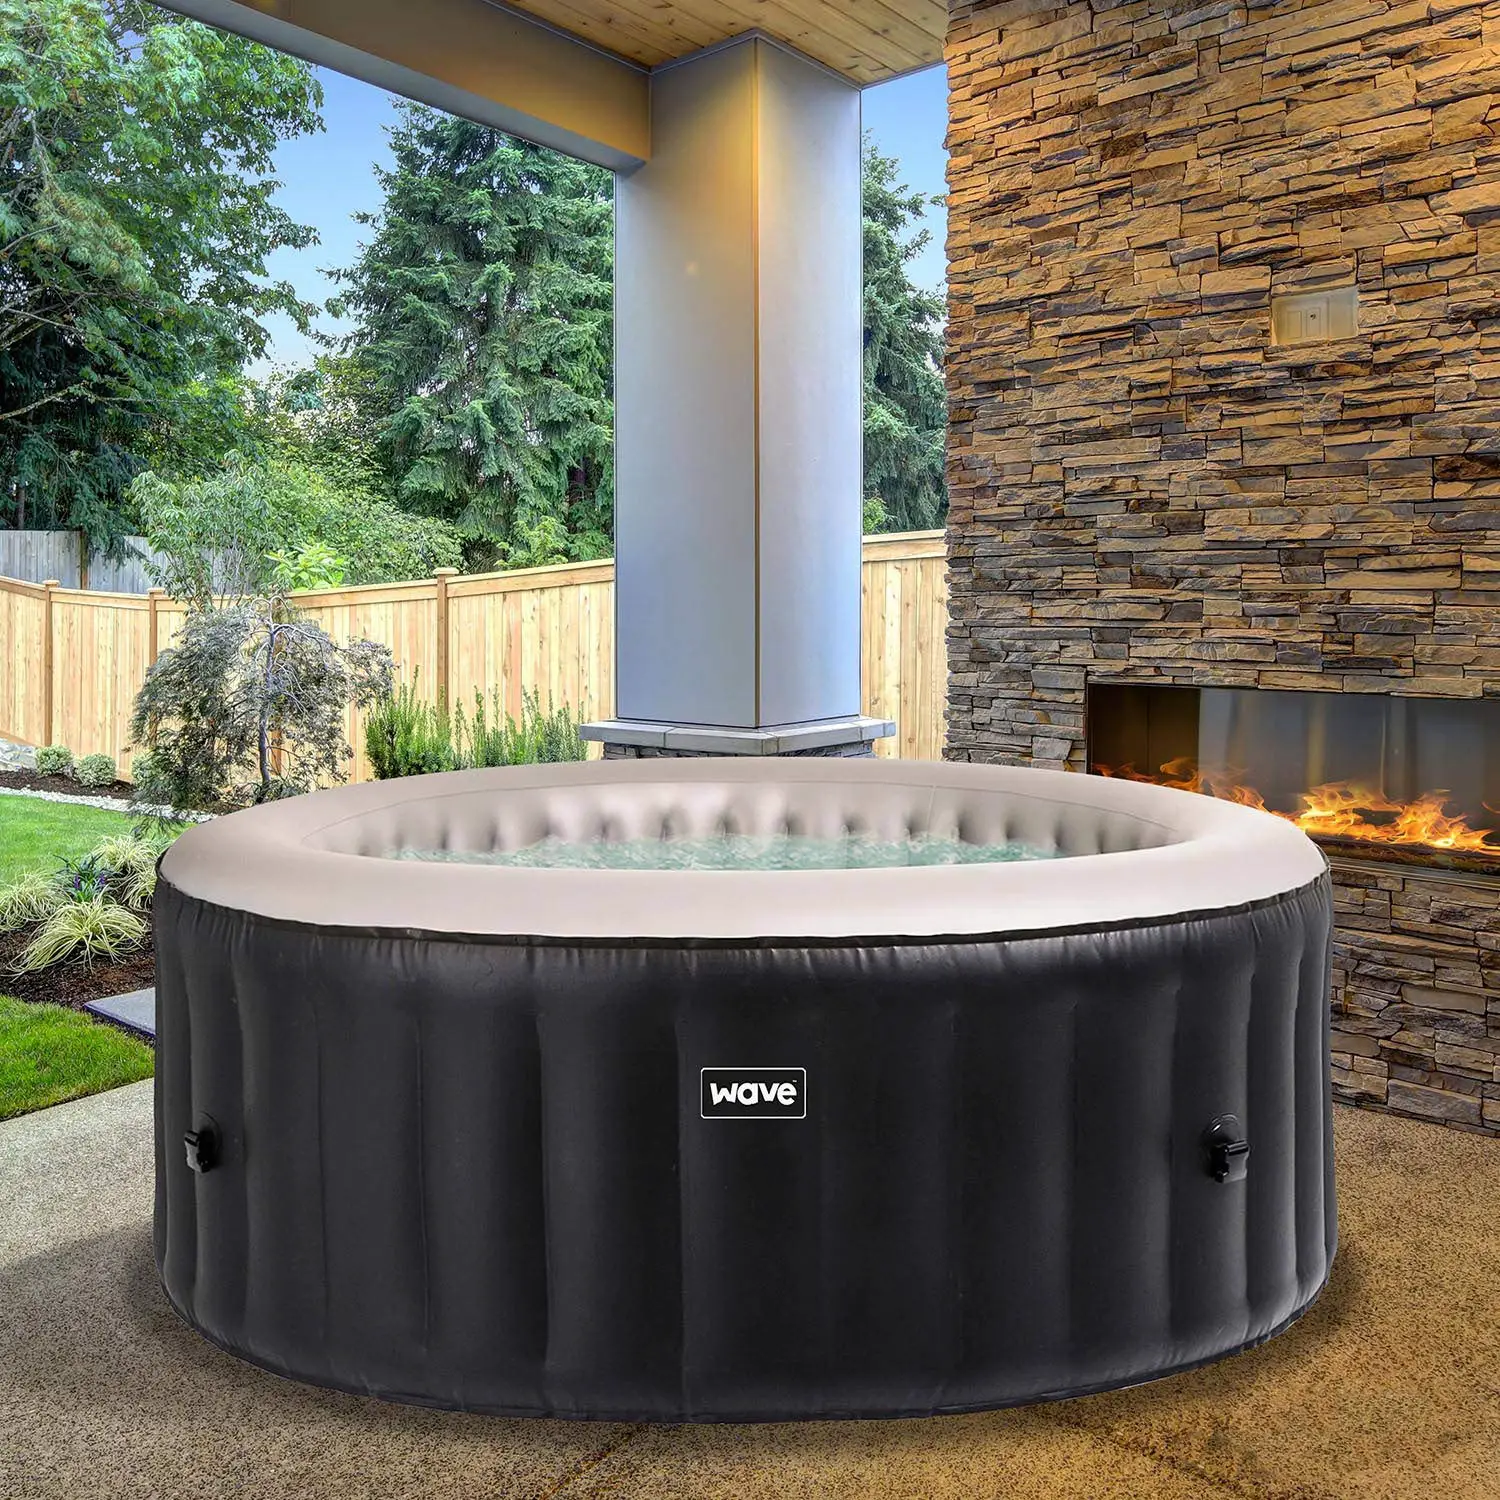 WAVE Spas Atlantic Inflatable Hot Tub, A Portable Inflatable Quick ...